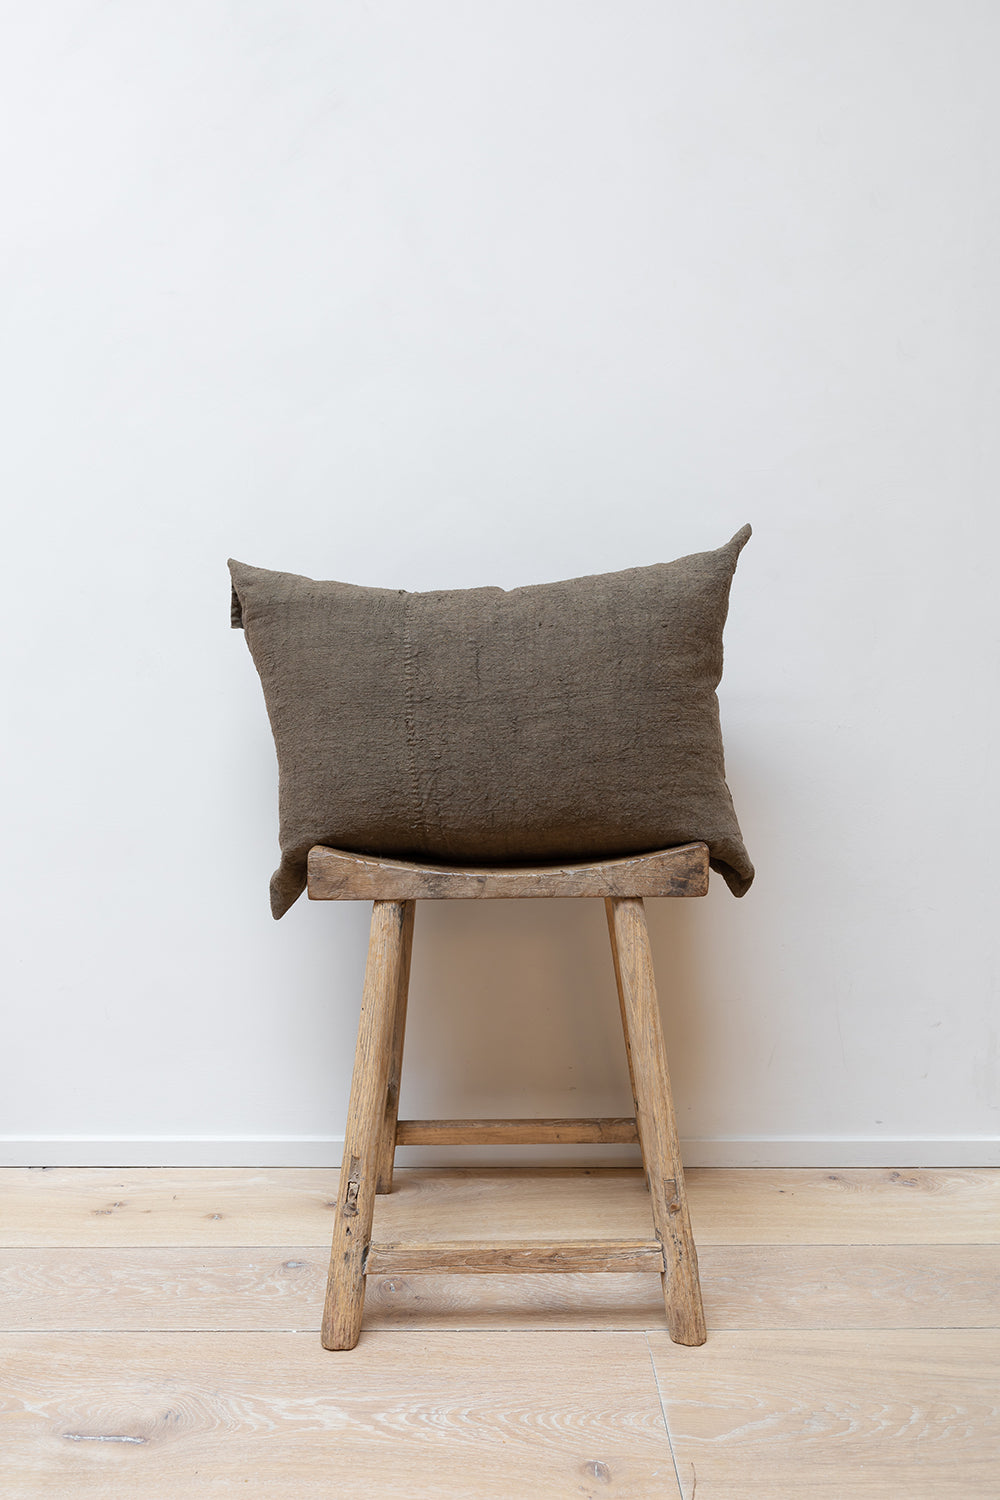 Chanvre Vintage - Bronze Cushion by Isabelle Yamamoto set on a Japanese wooden stool.